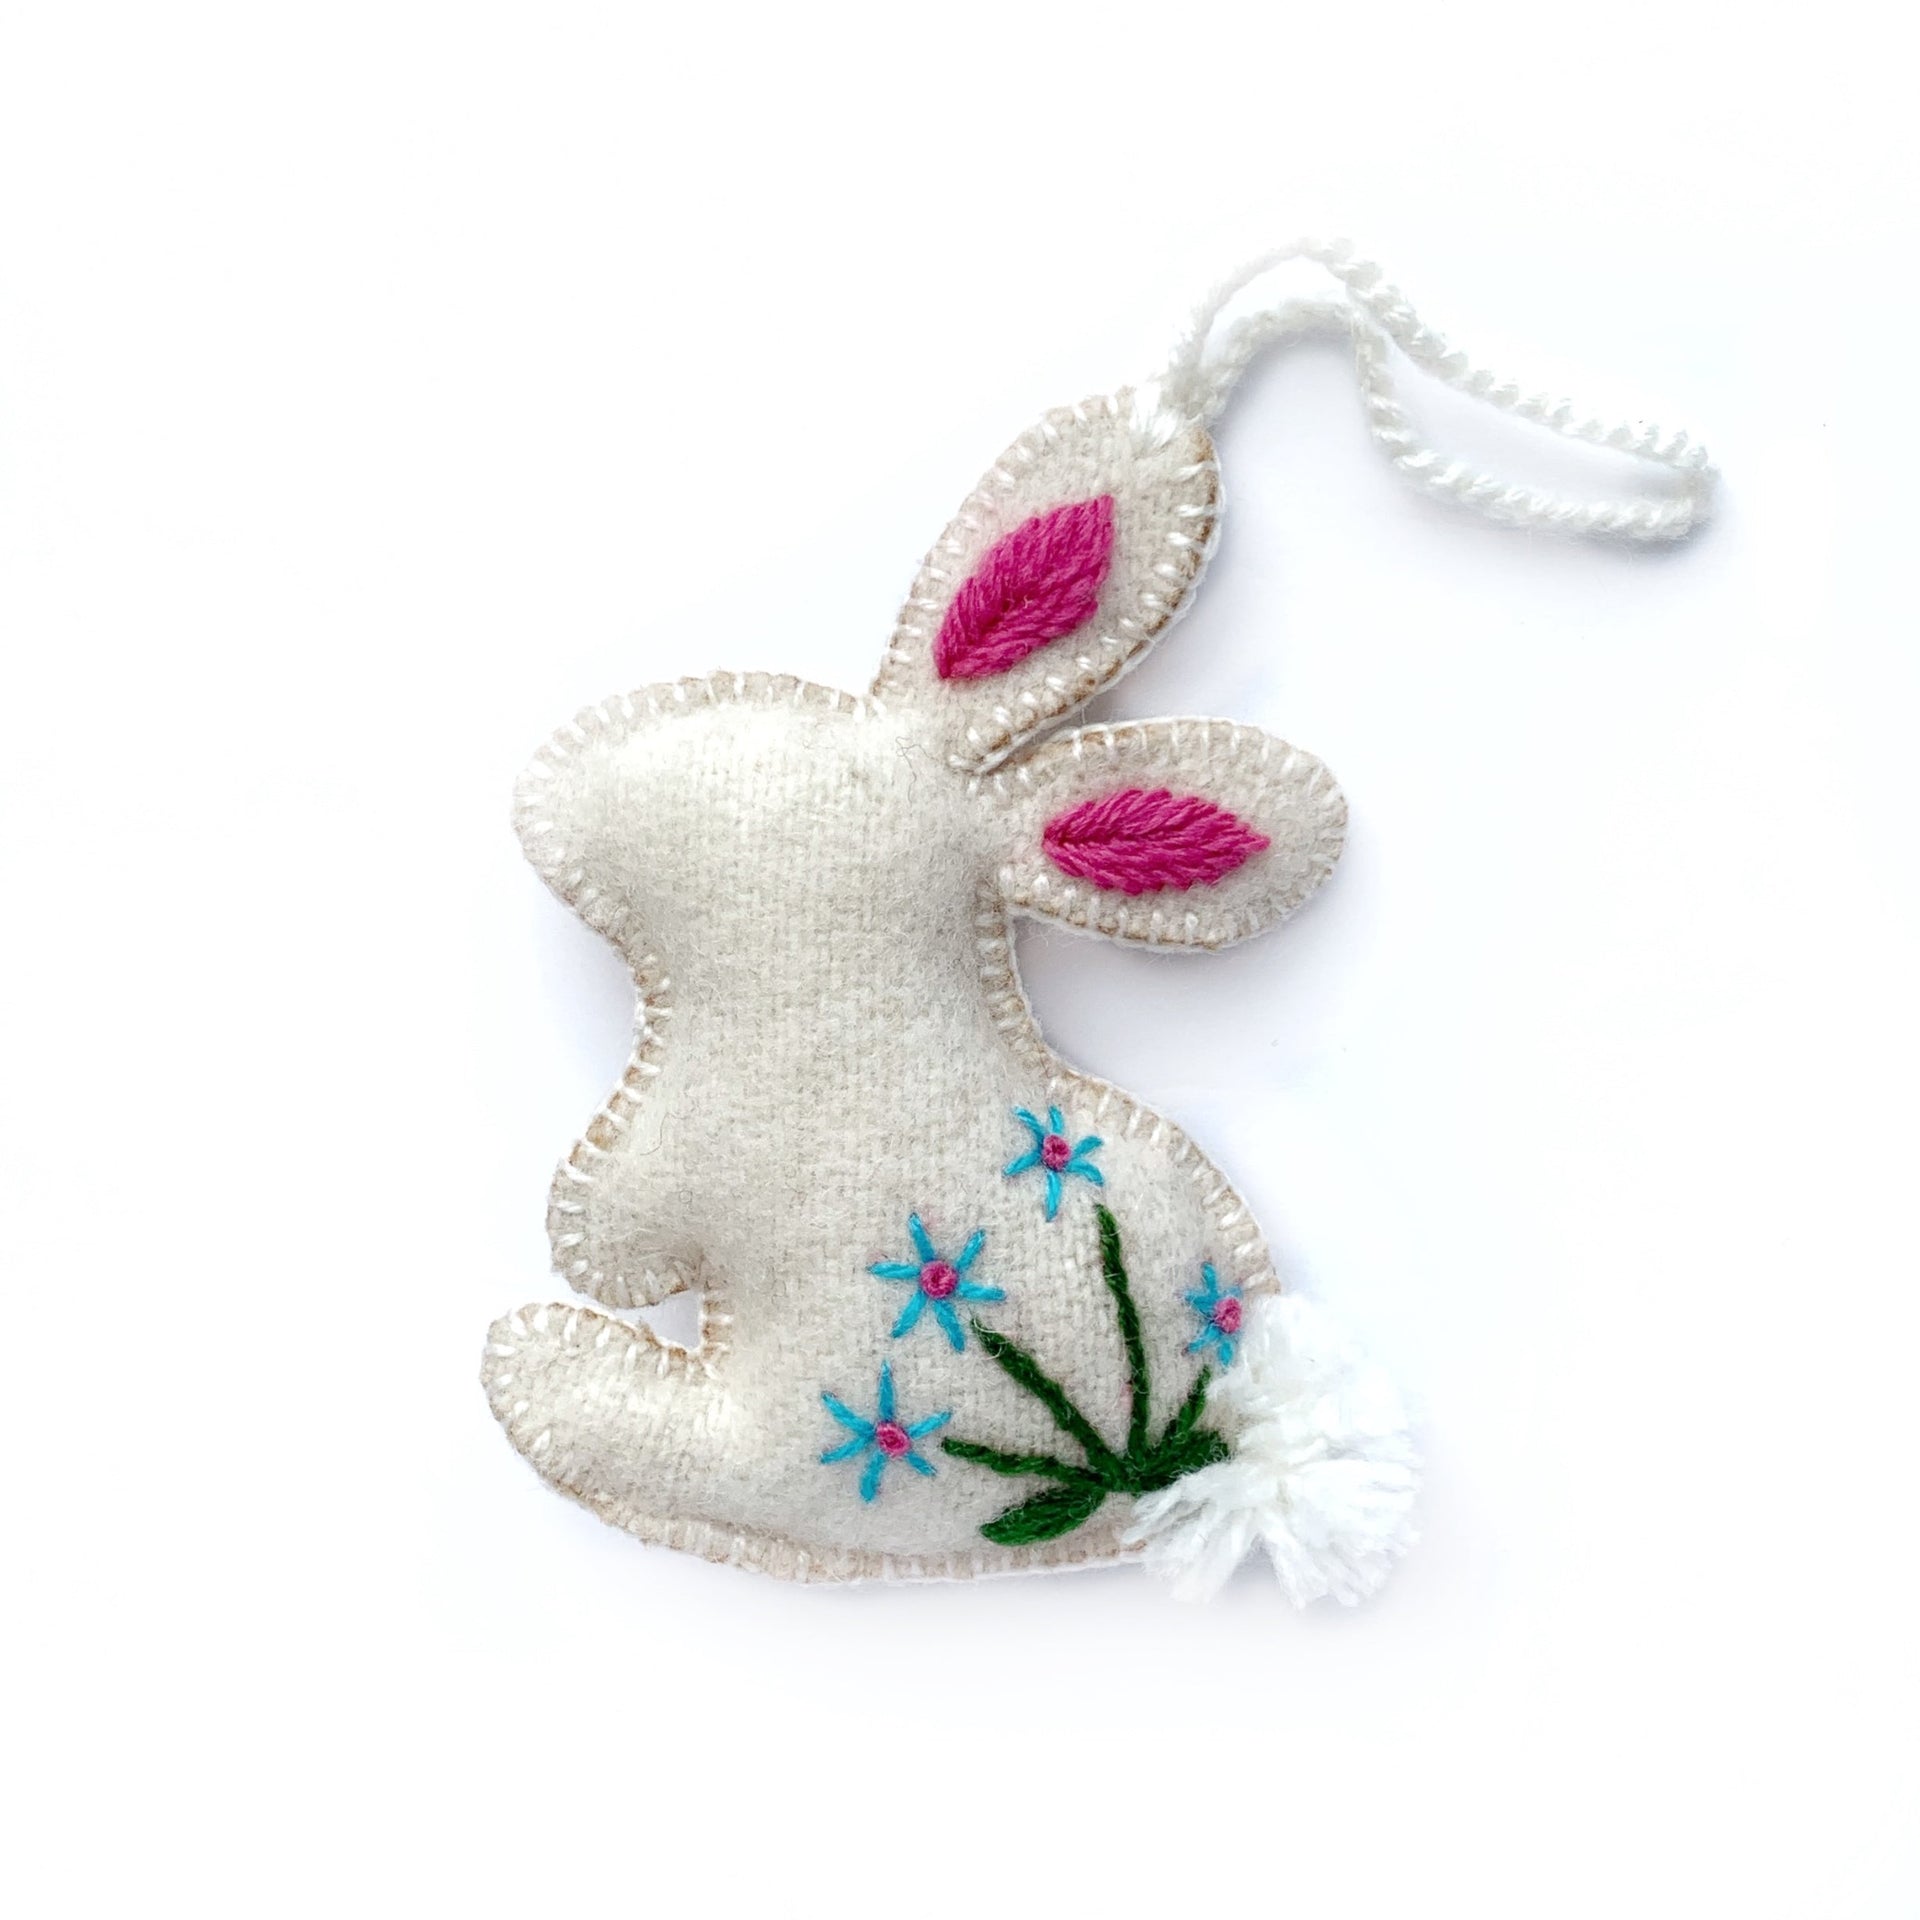 White Easter Bunny Ornament Fair Trade Embroidered Decoration